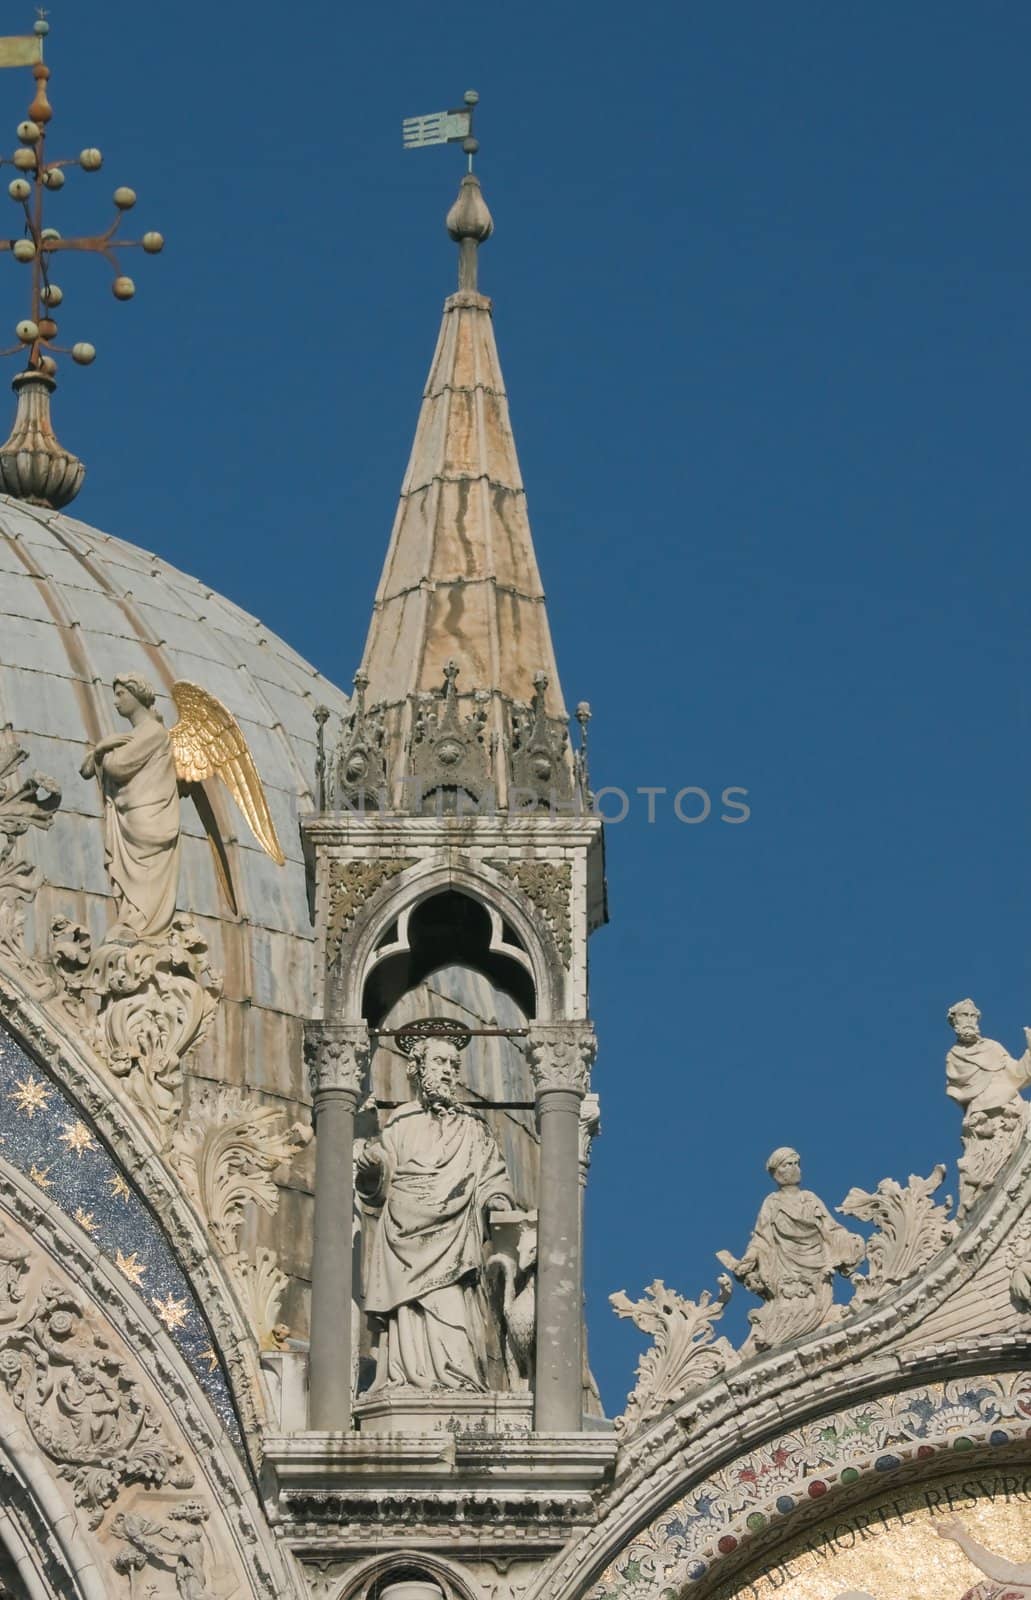 Sculptures and architectural decoration of the cathedral of San Marco in Venice